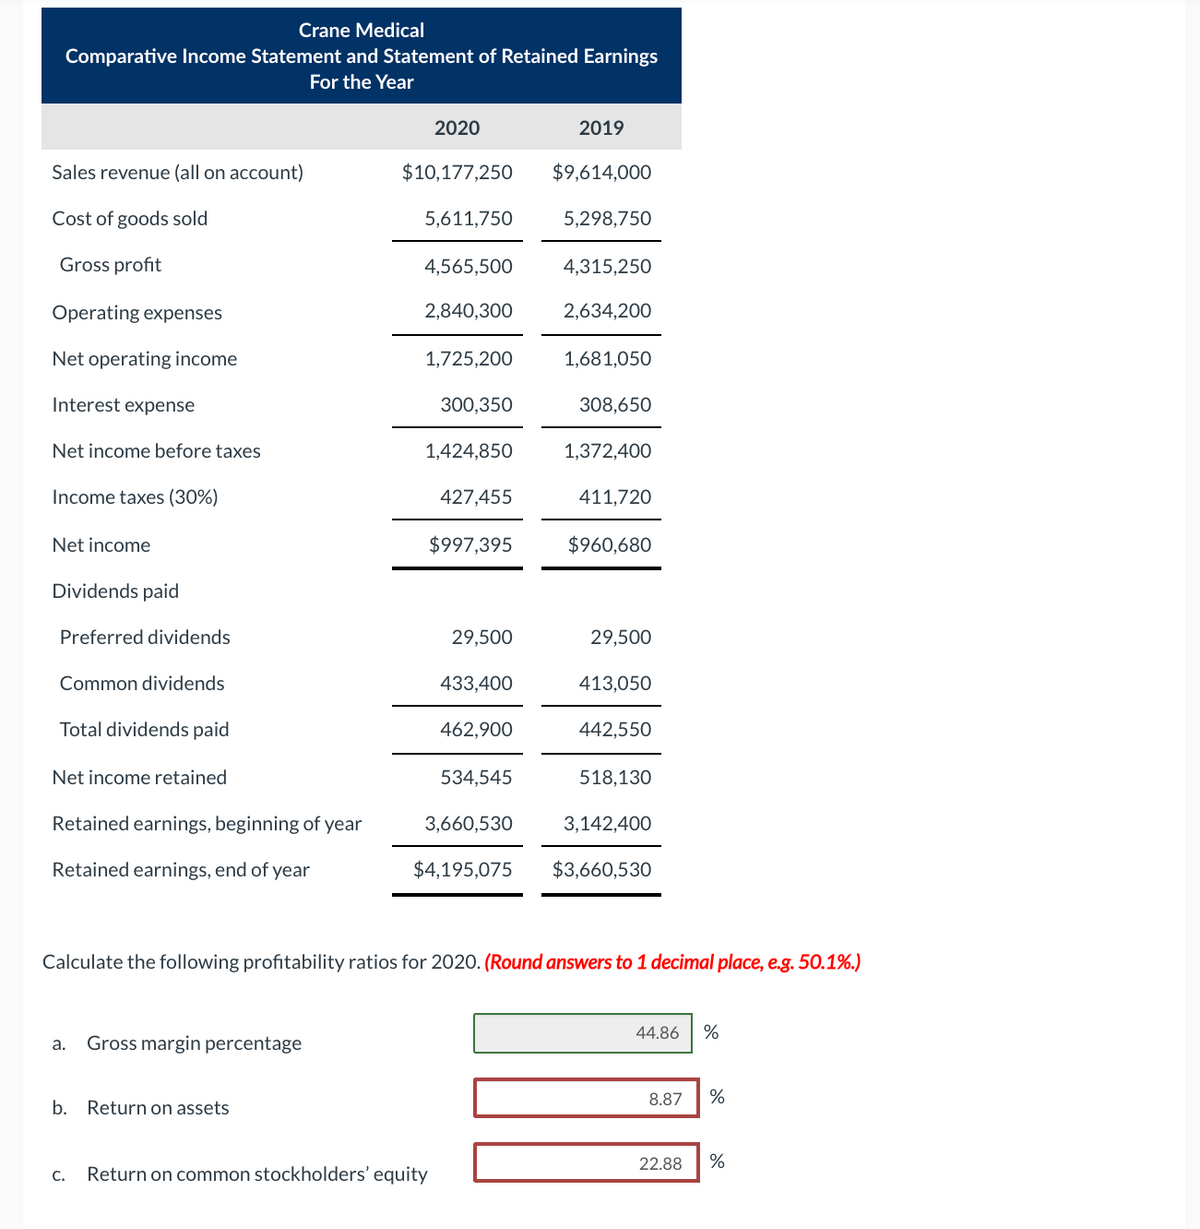 Crane Medical
Comparative Income Statement and Statement of Retained Earnings
For the Year
2020
2019
Sales revenue (all on account)
$10,177,250
$9,614,000
Cost of goods sold
5,611,750
5,298,750
Gross profit
4,565,500
4,315,250
Operating expenses
2,840,300
2,634,200
Net operating income
1,725,200
1,681,050
Interest expense
300,350
308,650
Net income before taxes
1,424,850
1,372,400
Income taxes (30%)
427,455
411,720
Net income
$997,395
$960,680
Dividends paid
Preferred dividends
29,500
29,500
Common dividends
433,400
413,050
Total dividends paid
462,900
442,550
Net income retained
534,545
518,130
Retained earnings, beginning of year
3,660,530
3,142,400
Retained earnings, end of year
$4,195,075
$3,660,530
Calculate the following profitability ratios for 2020. (Round answers to 1 decimal place, e.g. 50.1%.)
44.86
%
а.
Gross margin percentage
8.87
b. Return on assets
22.88
%
С.
Return on common stockholders' equity
